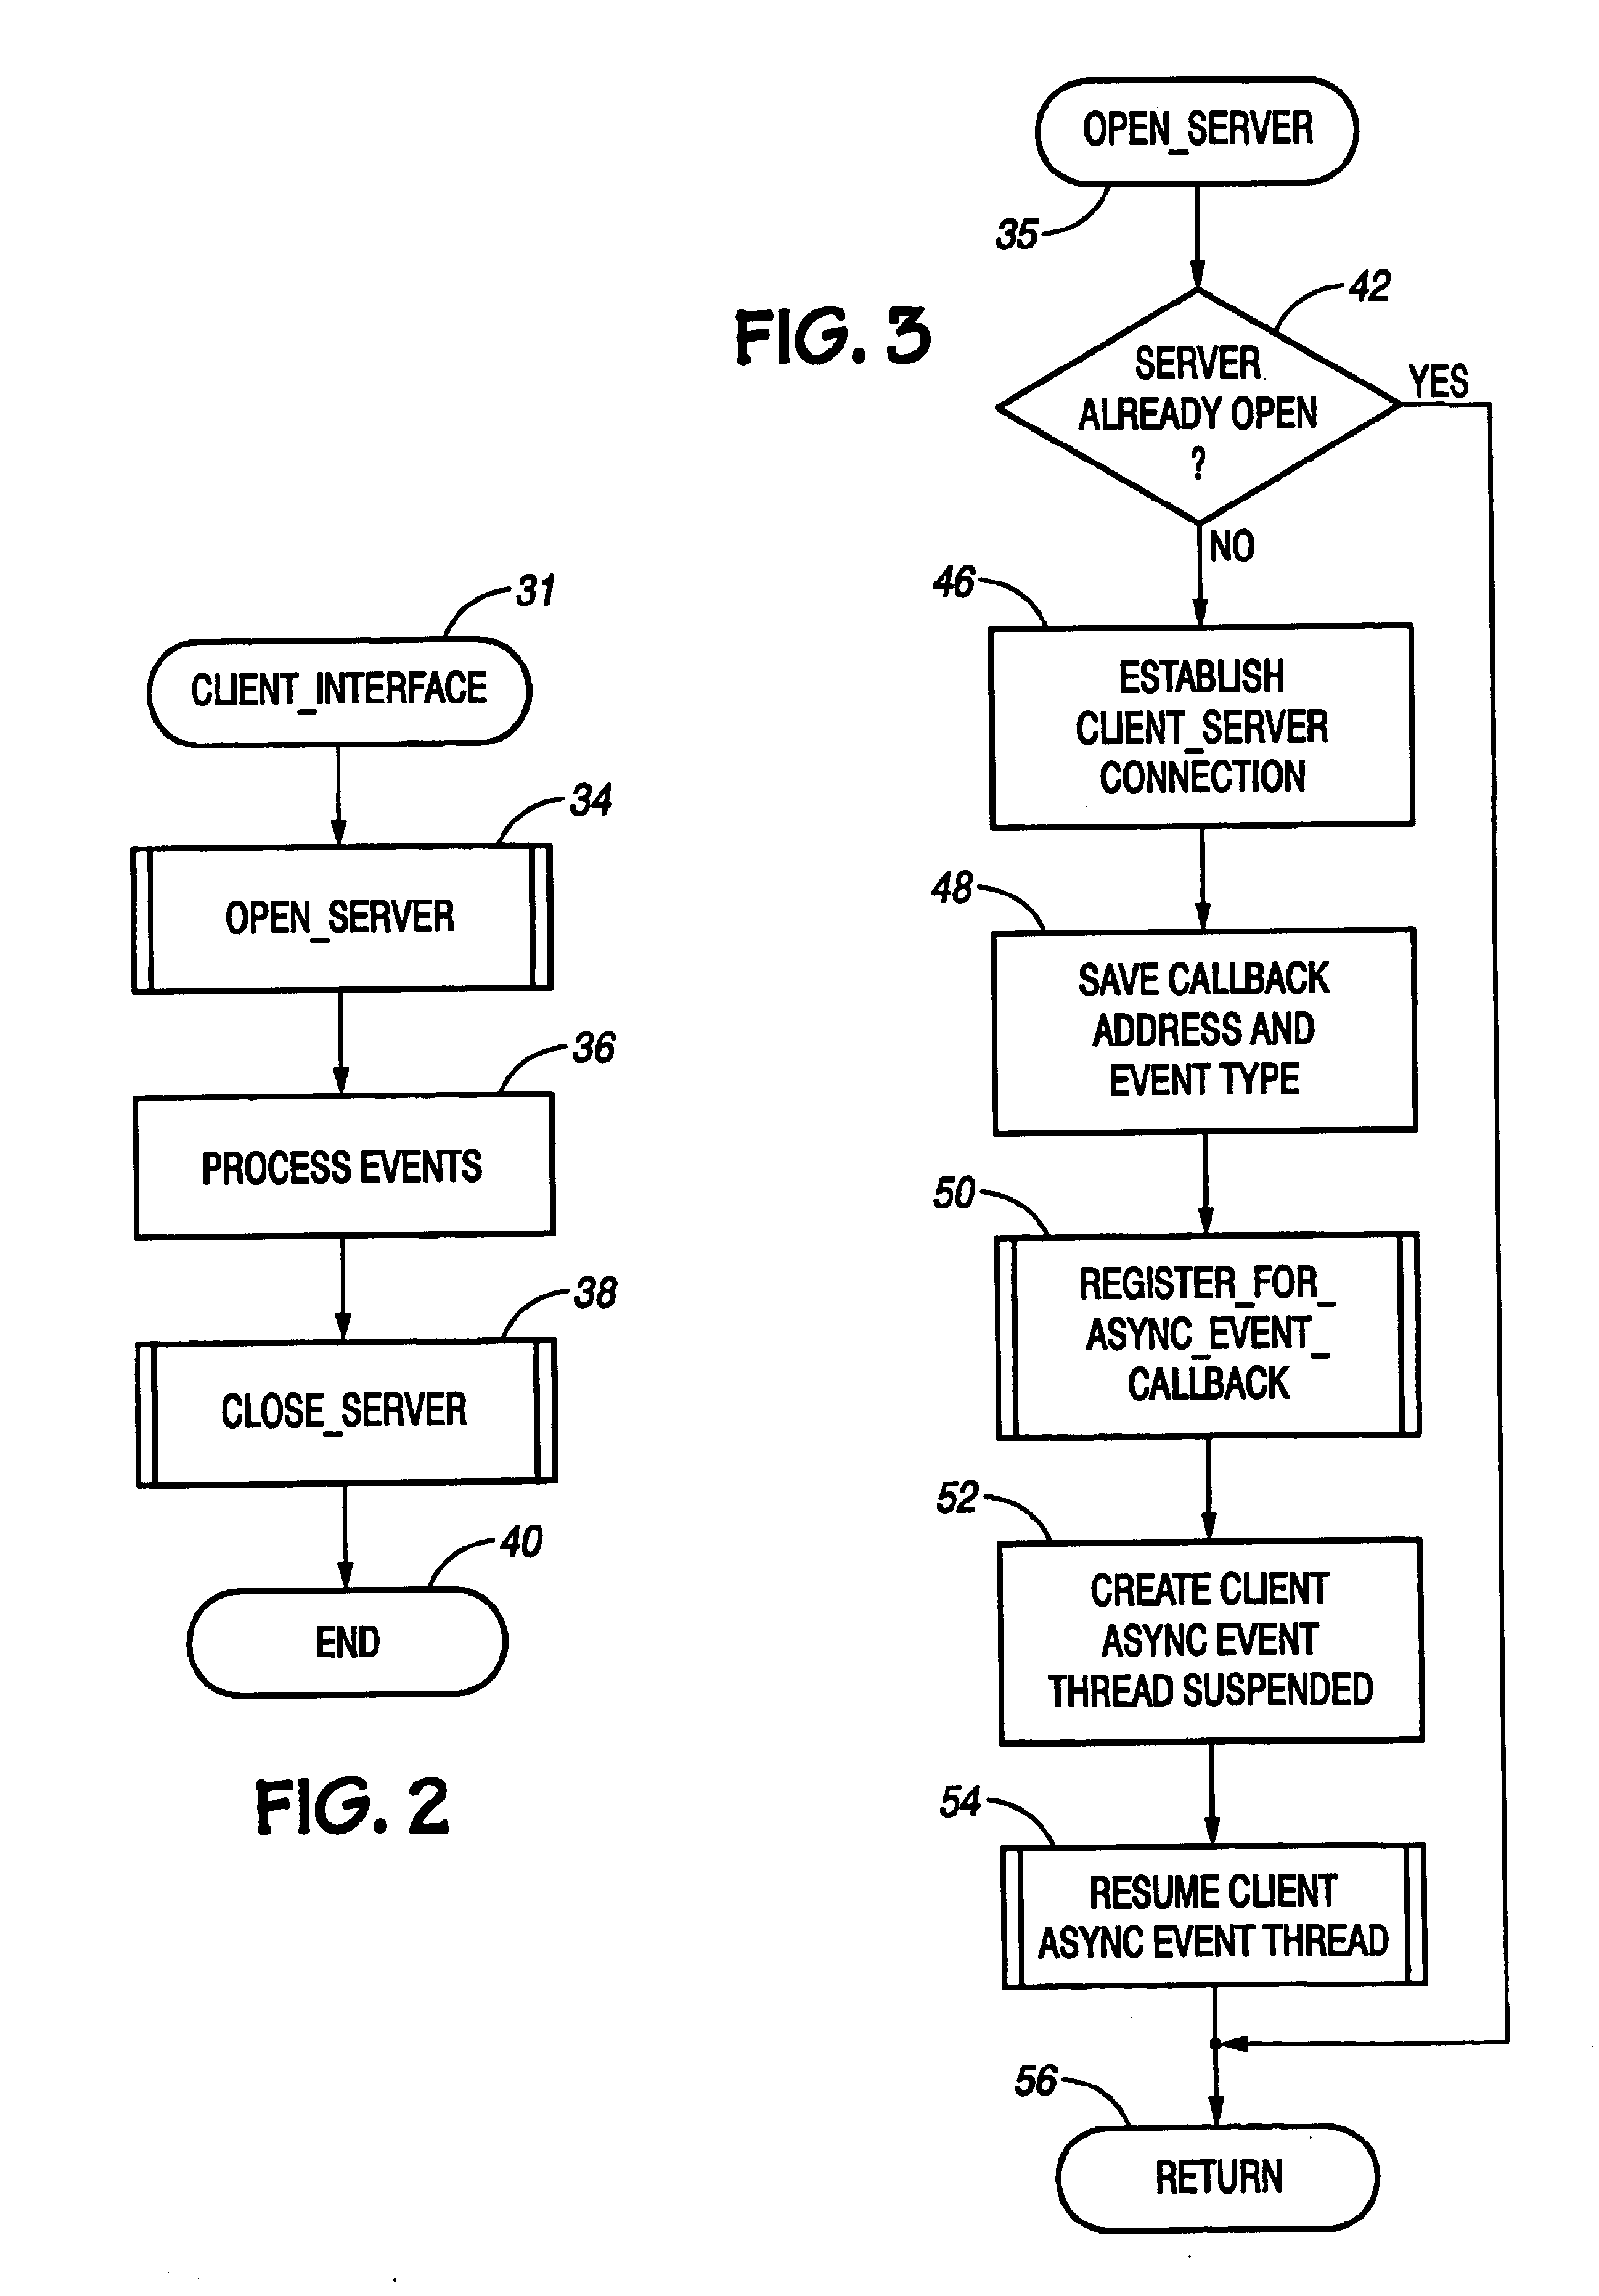 Method of communicating asynchronous events to remote procedure call clients